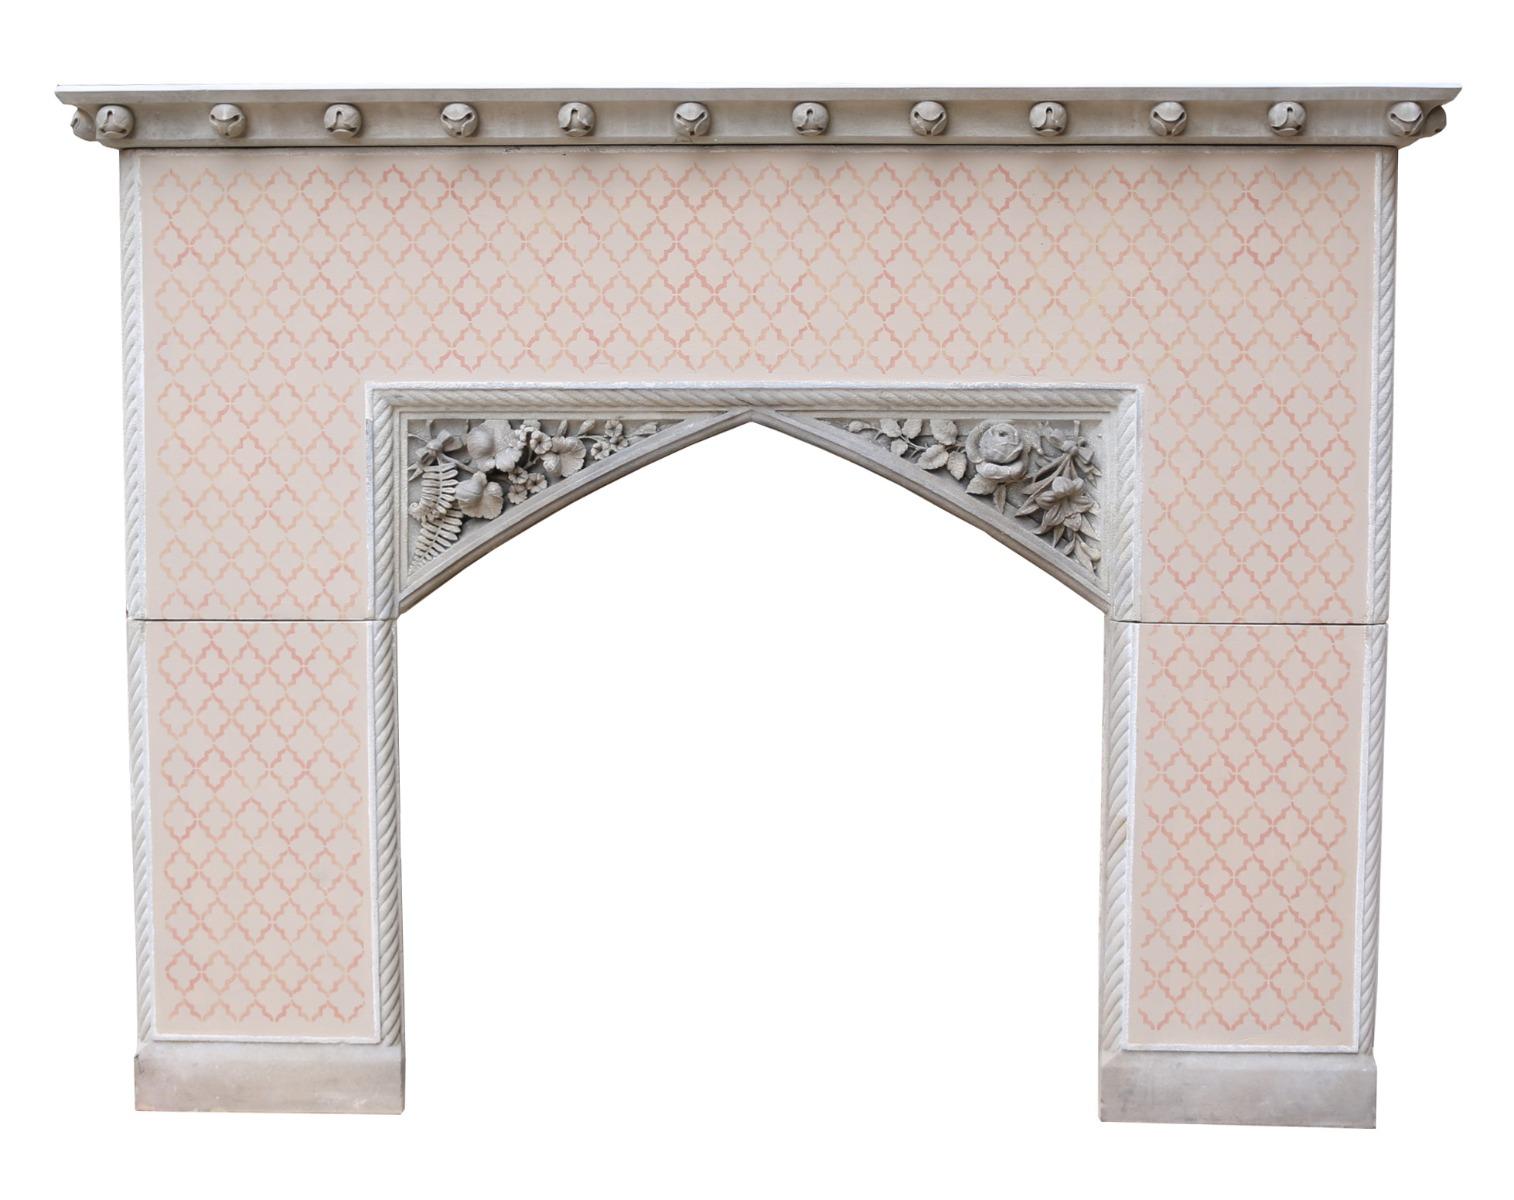 An unusual English Gothic revival fire surround, carved from pale sandstone. The front and the sides of the fire surround have a plaster finish with painted stencil decoration. Salvaged from a property in Cheshire.

Opening Height 81.5 cm (32.09